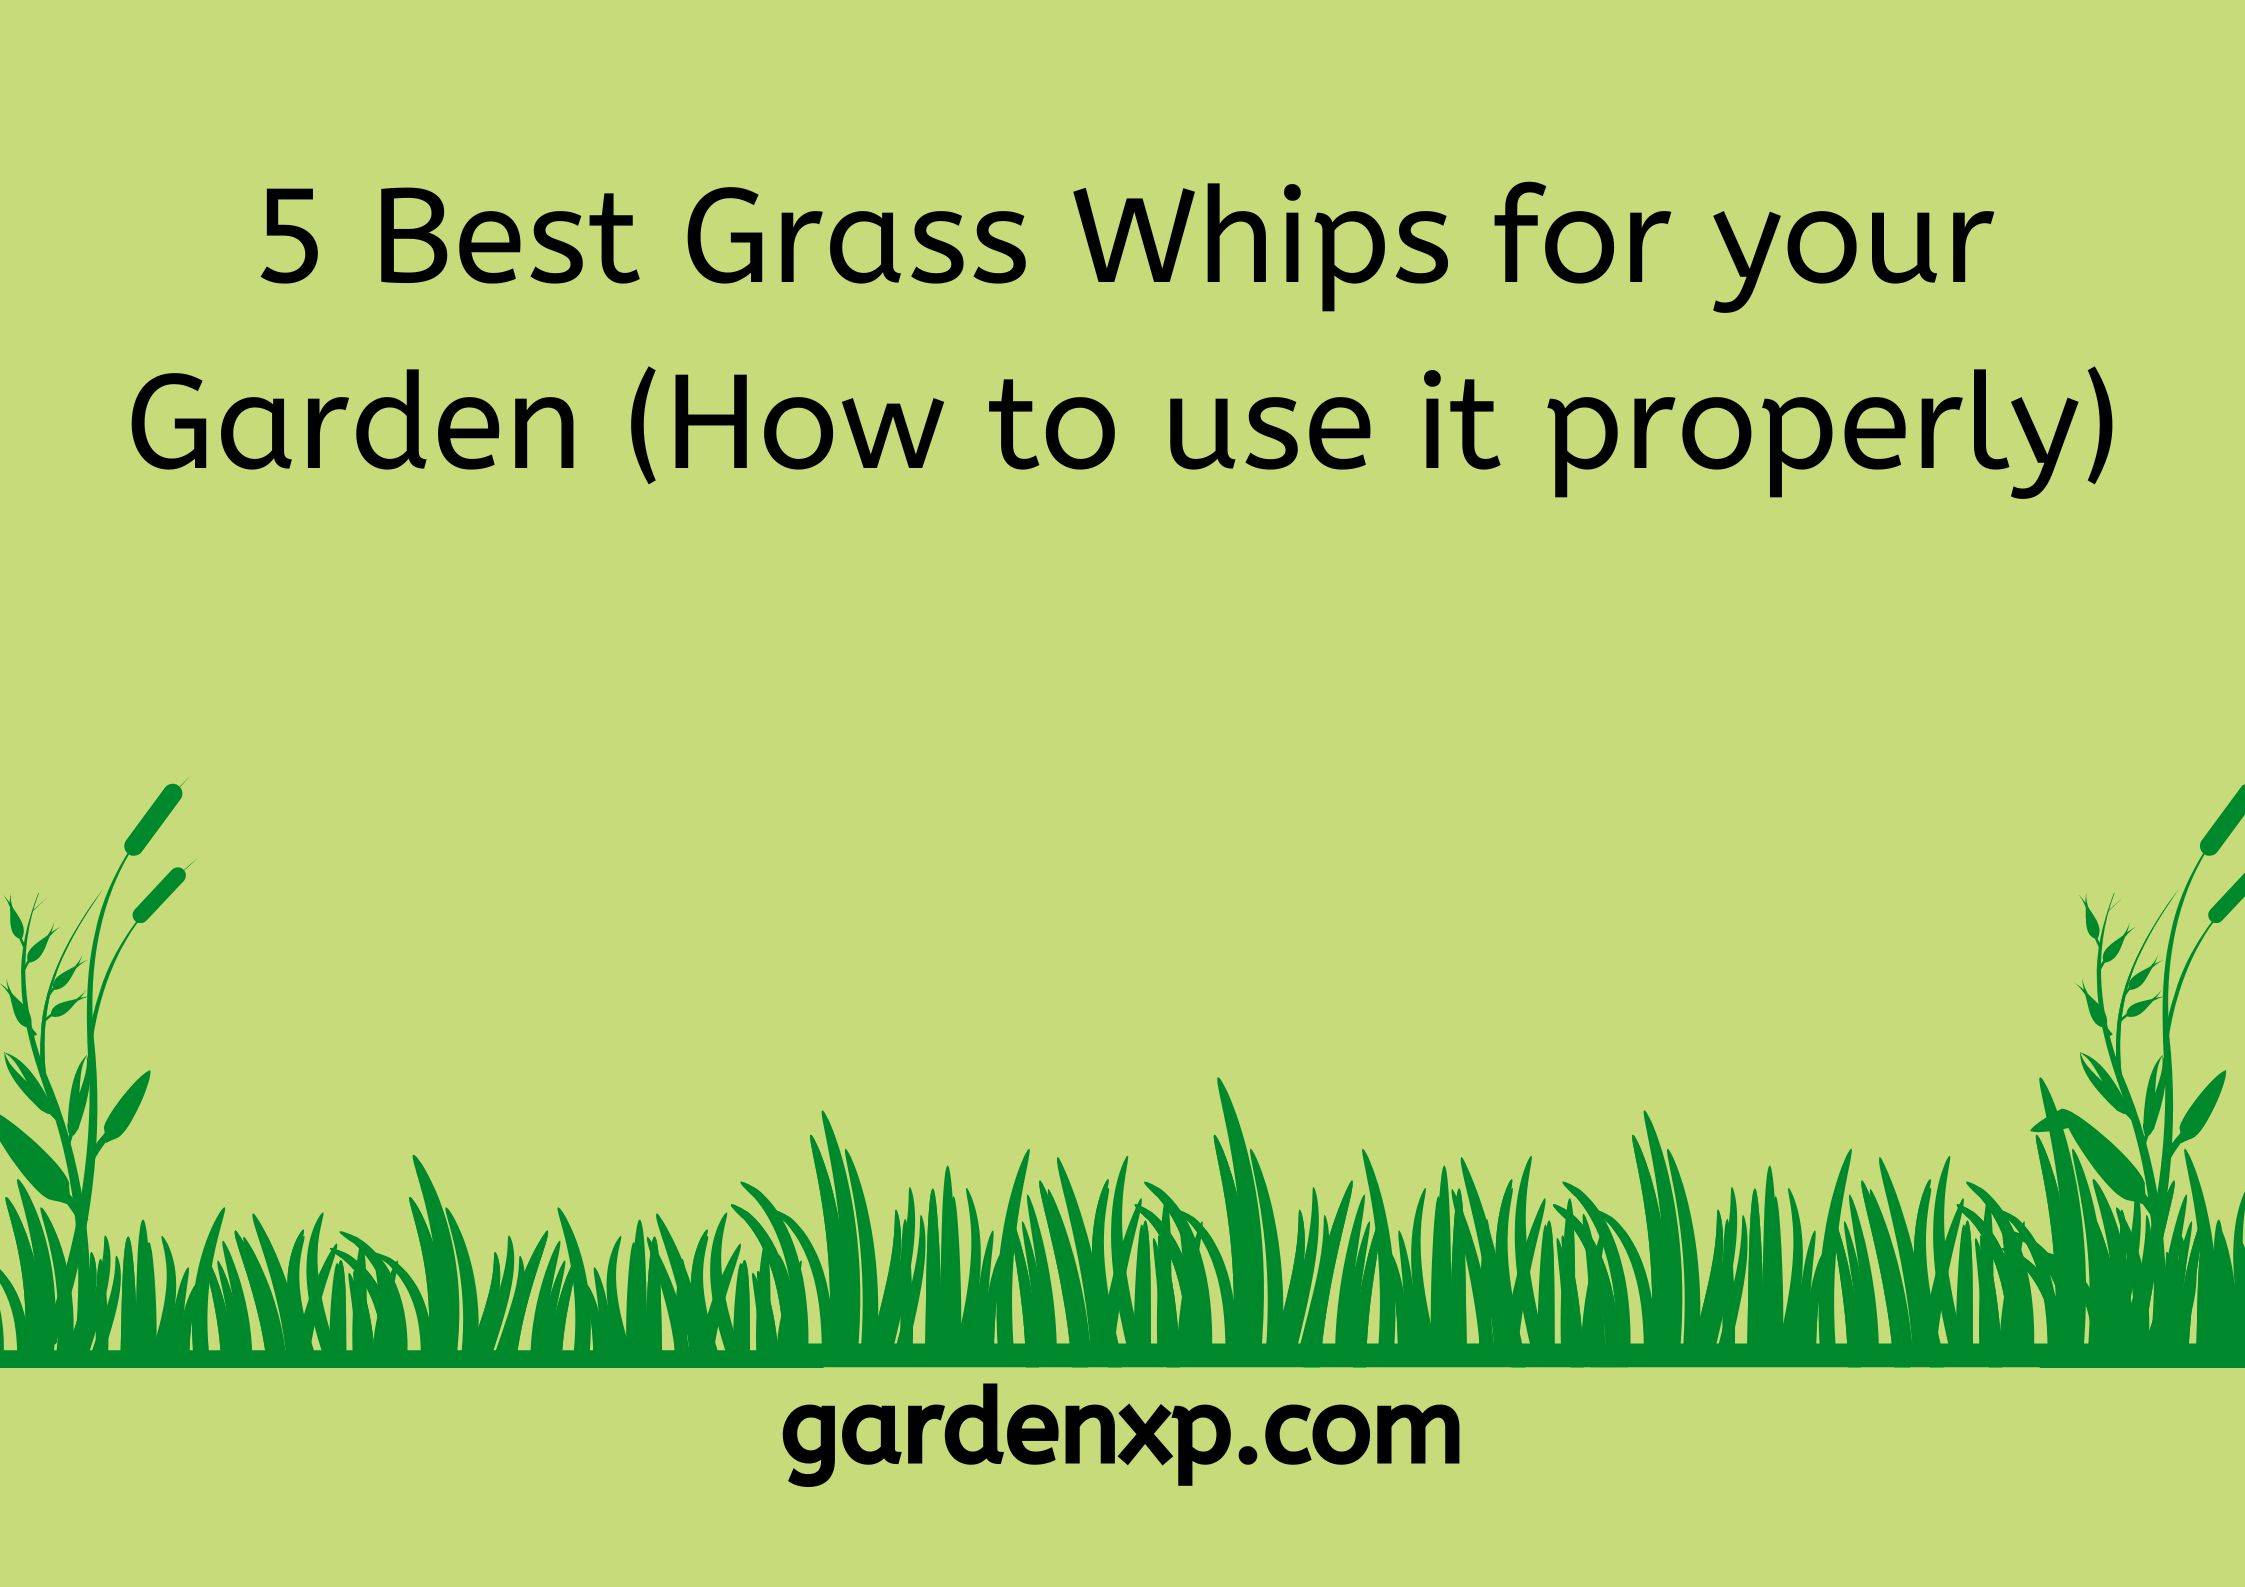 5 Best Grass Whips for your Garden (How to use it properly)